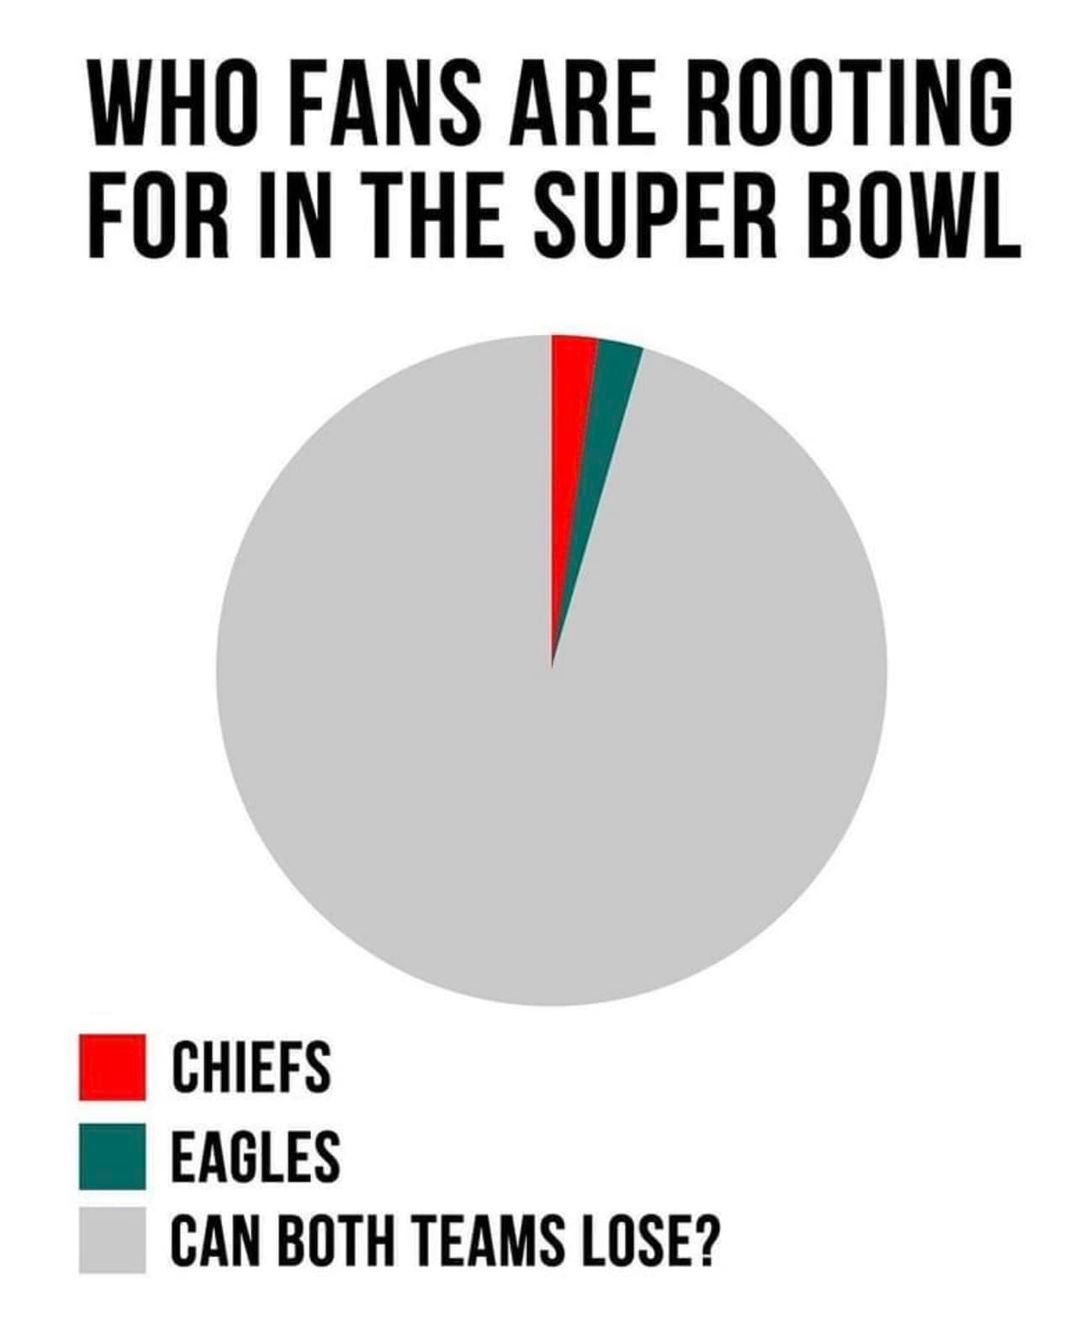 May be an image of text that says 'WHO FANS ARE ROOTING FOR IN THE SUPER BOWL CHIEFS EAGLES CAN BOTH TEAMS LOSE?'